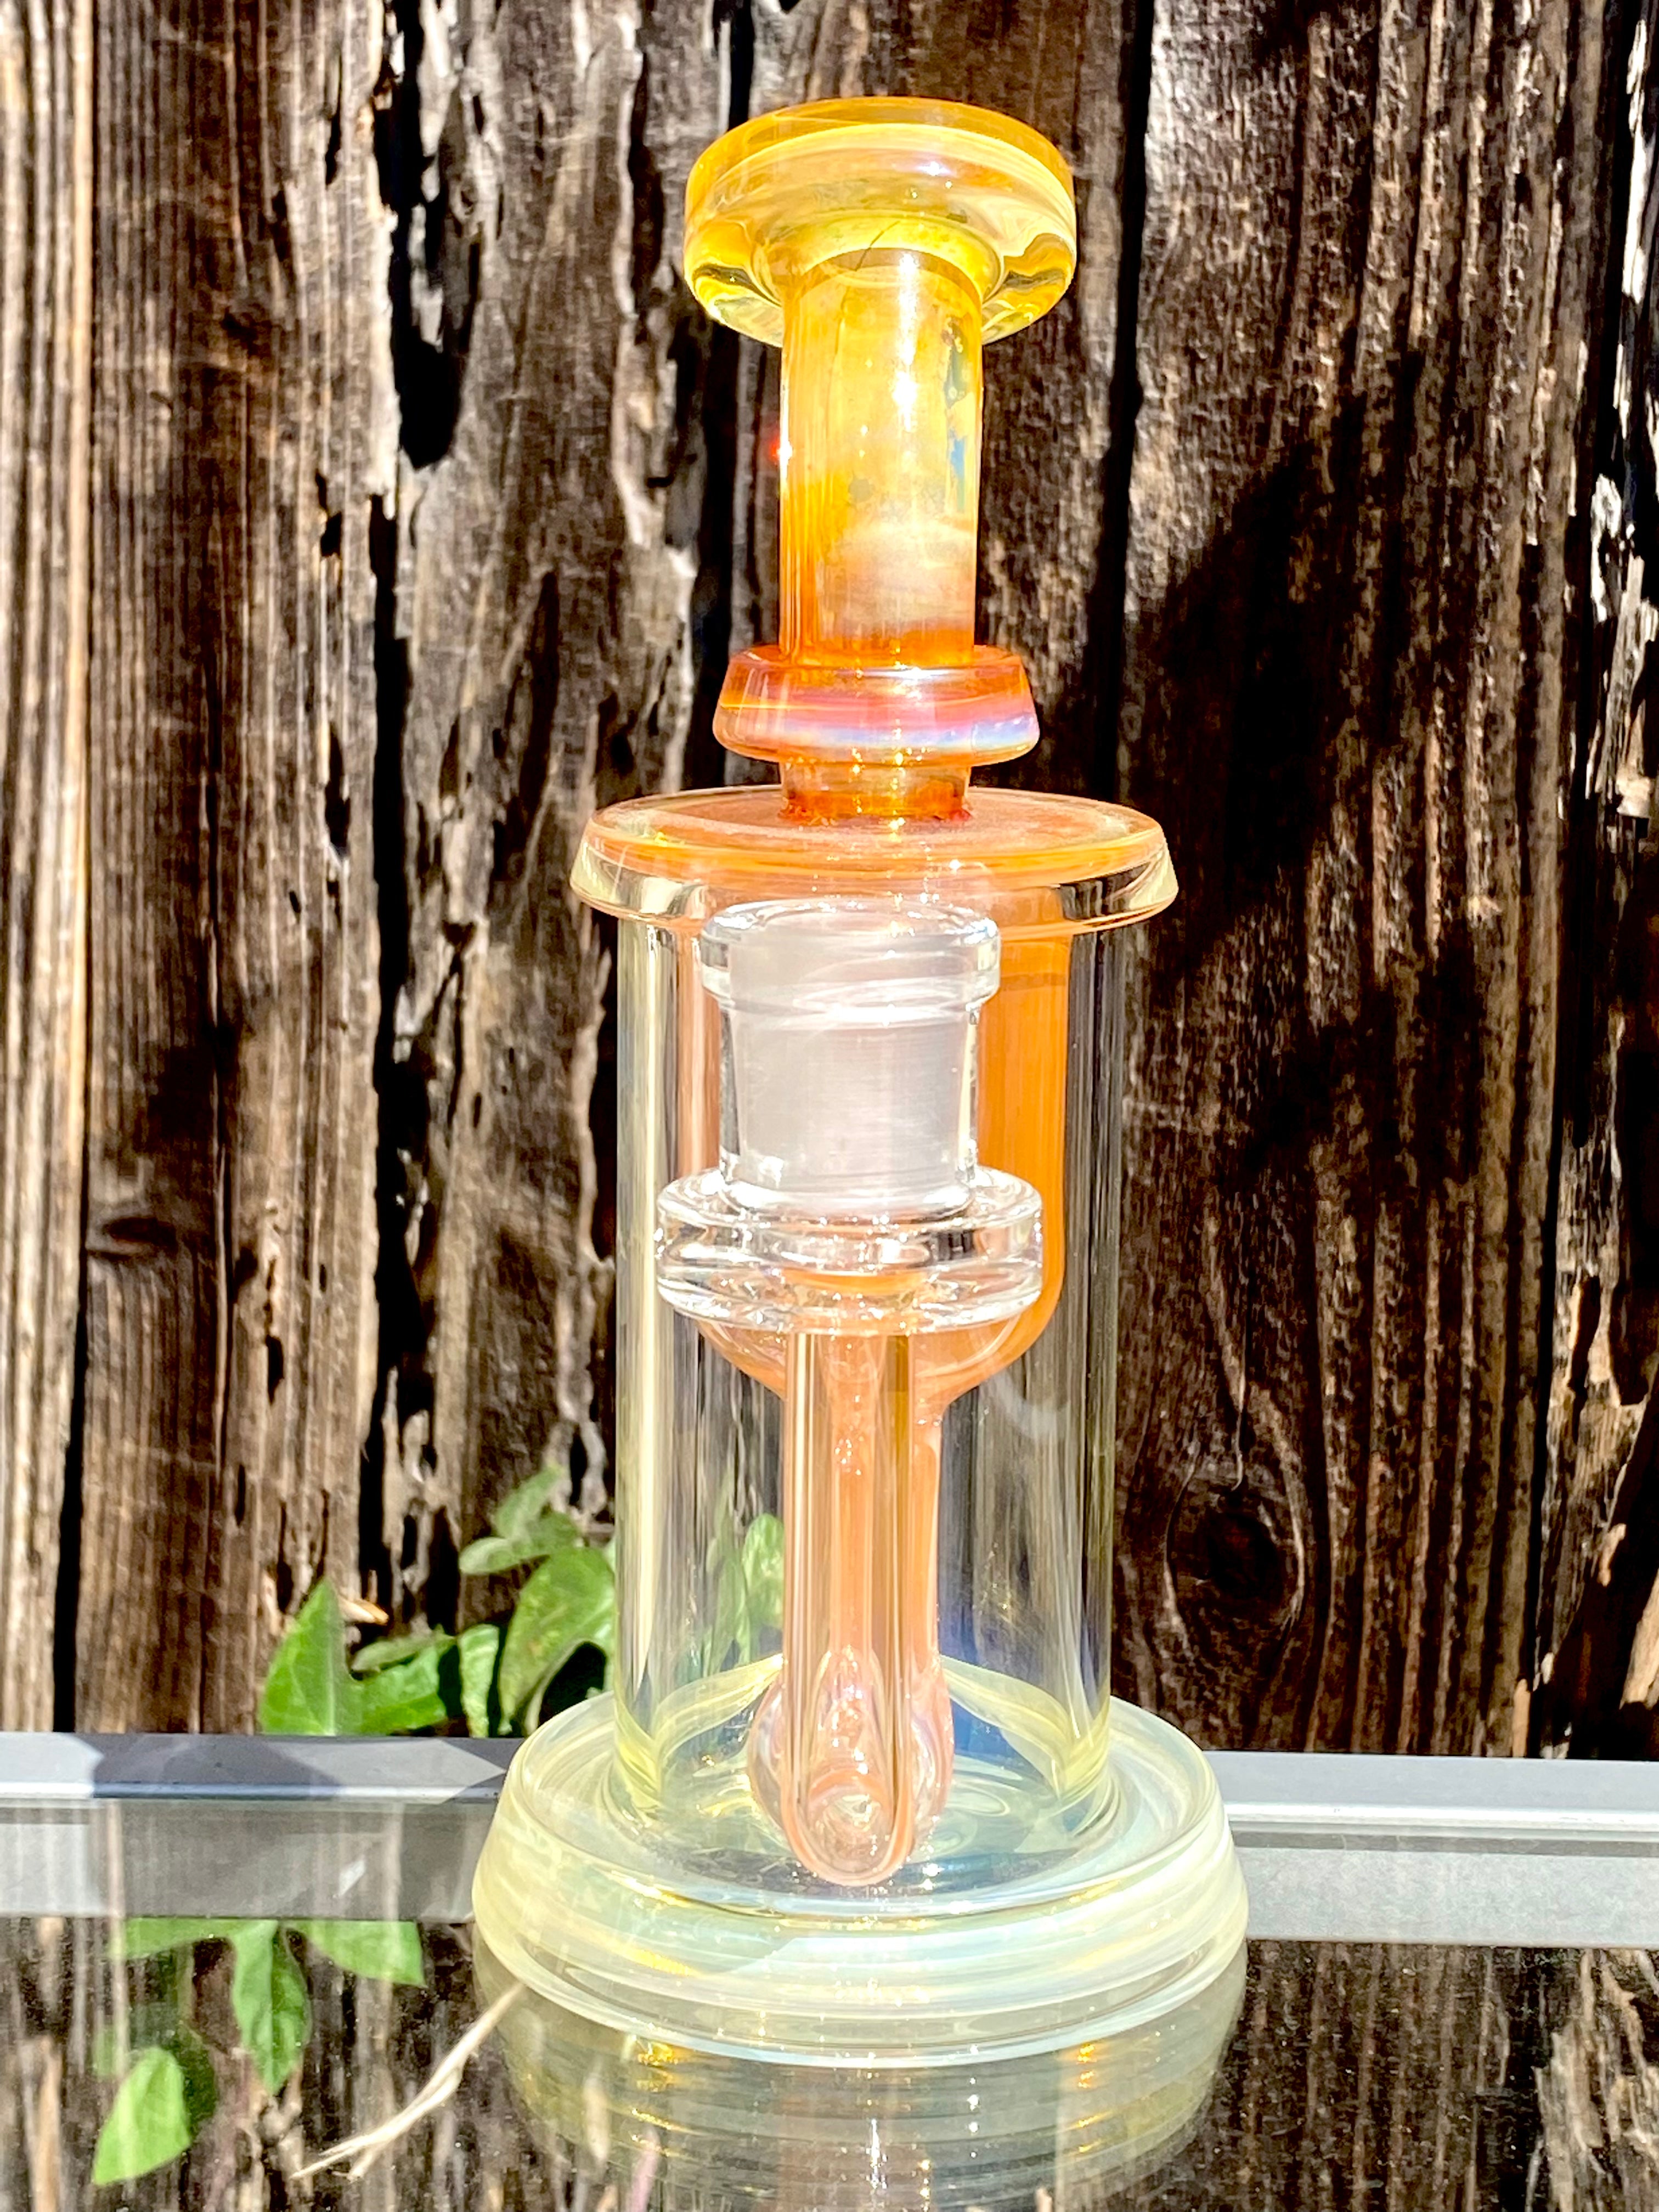 Leisure Glass 14mm Fumed Incycler